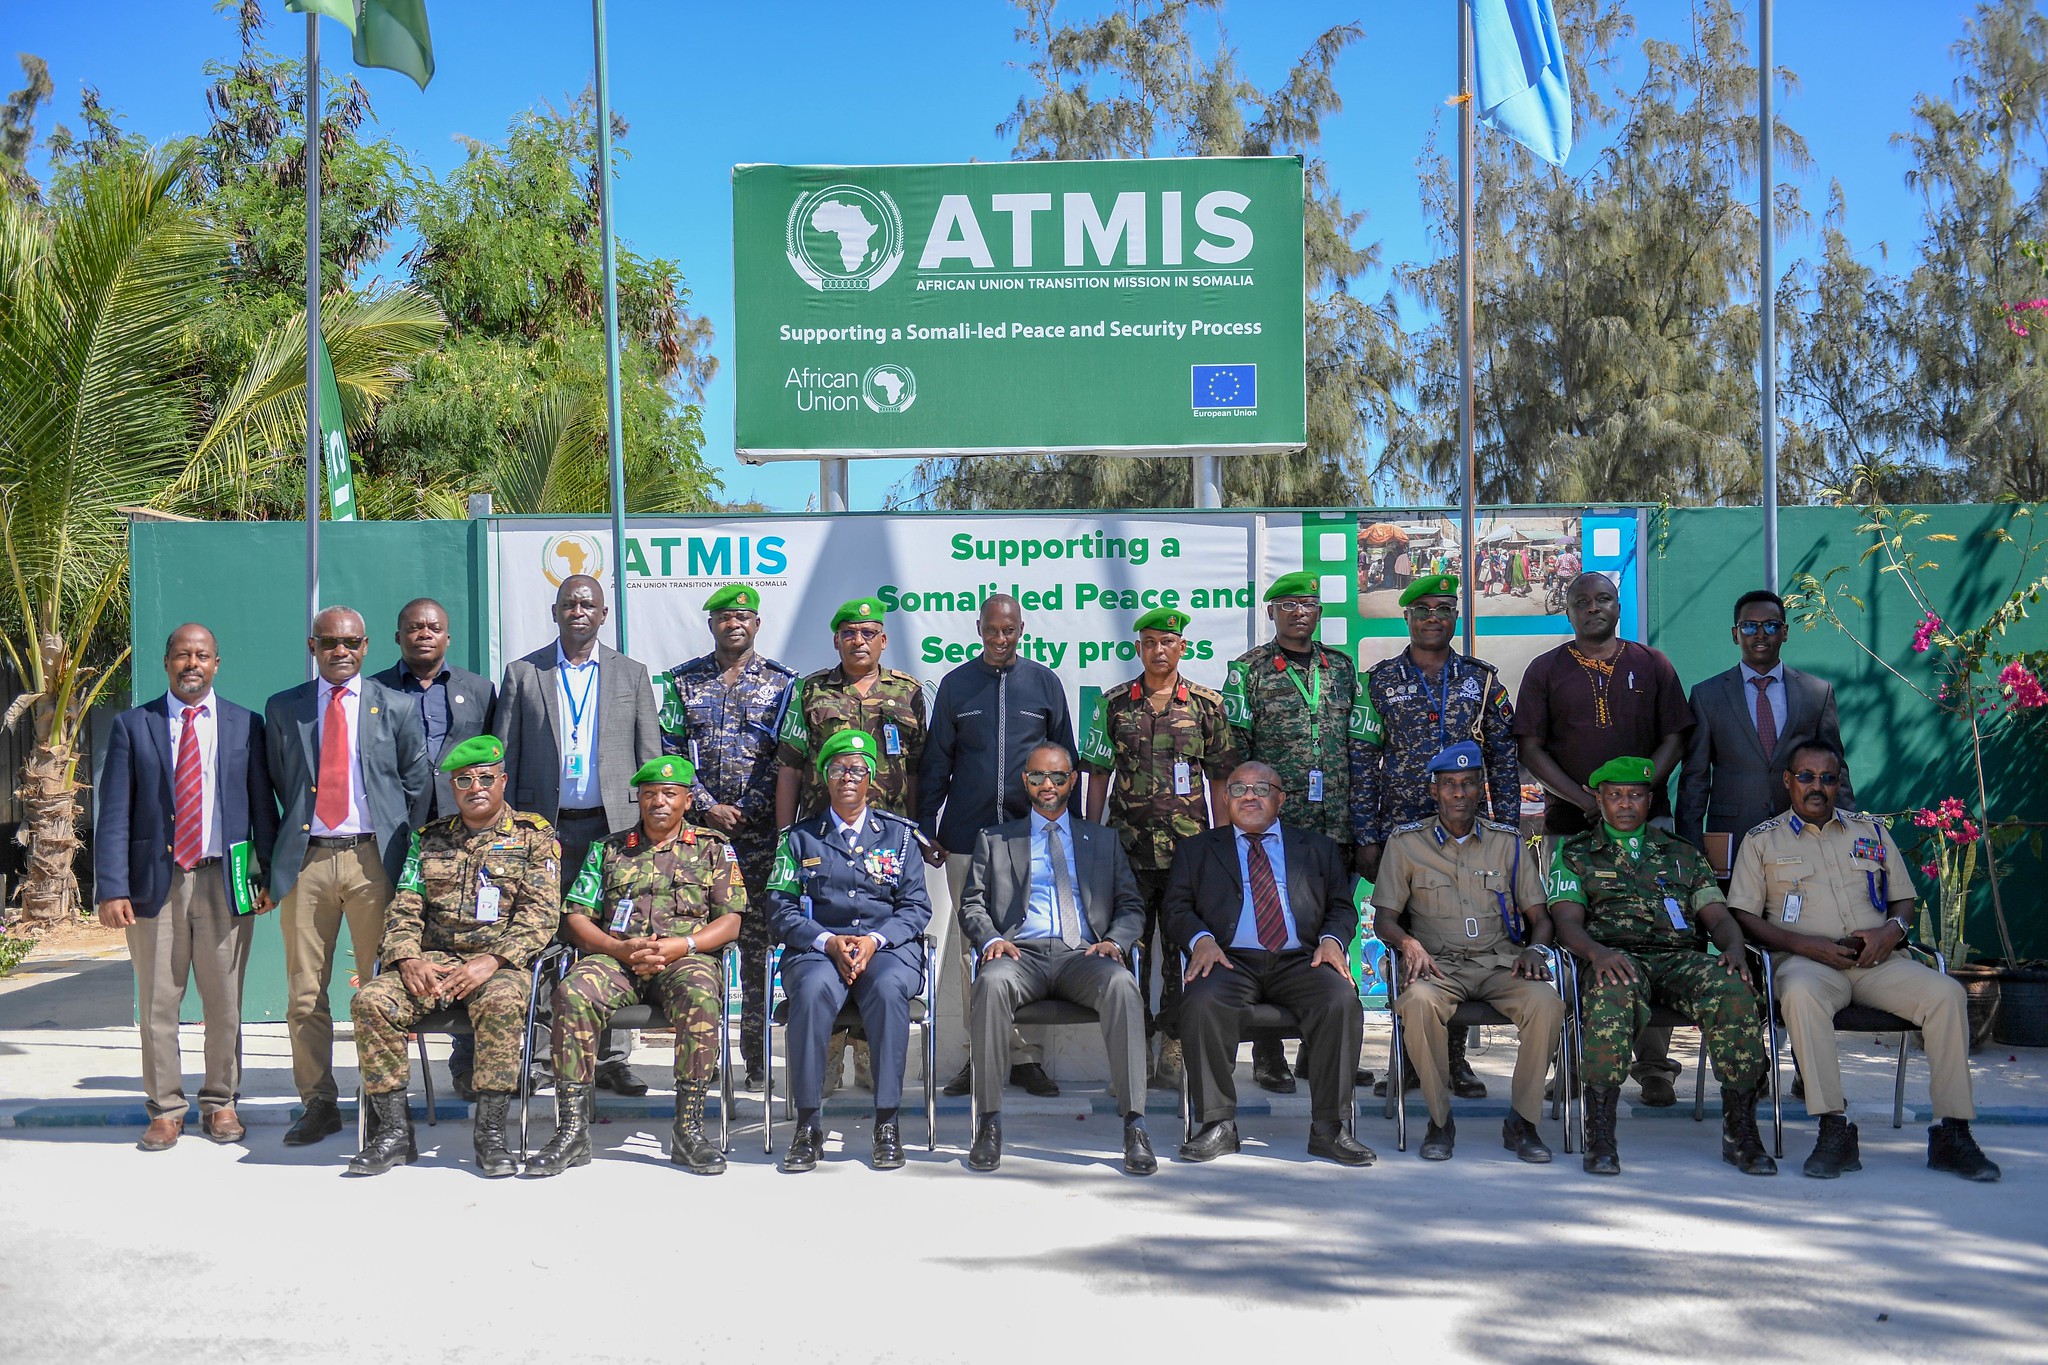 AU marks first anniversary of African Union Transition Mission in Somalia